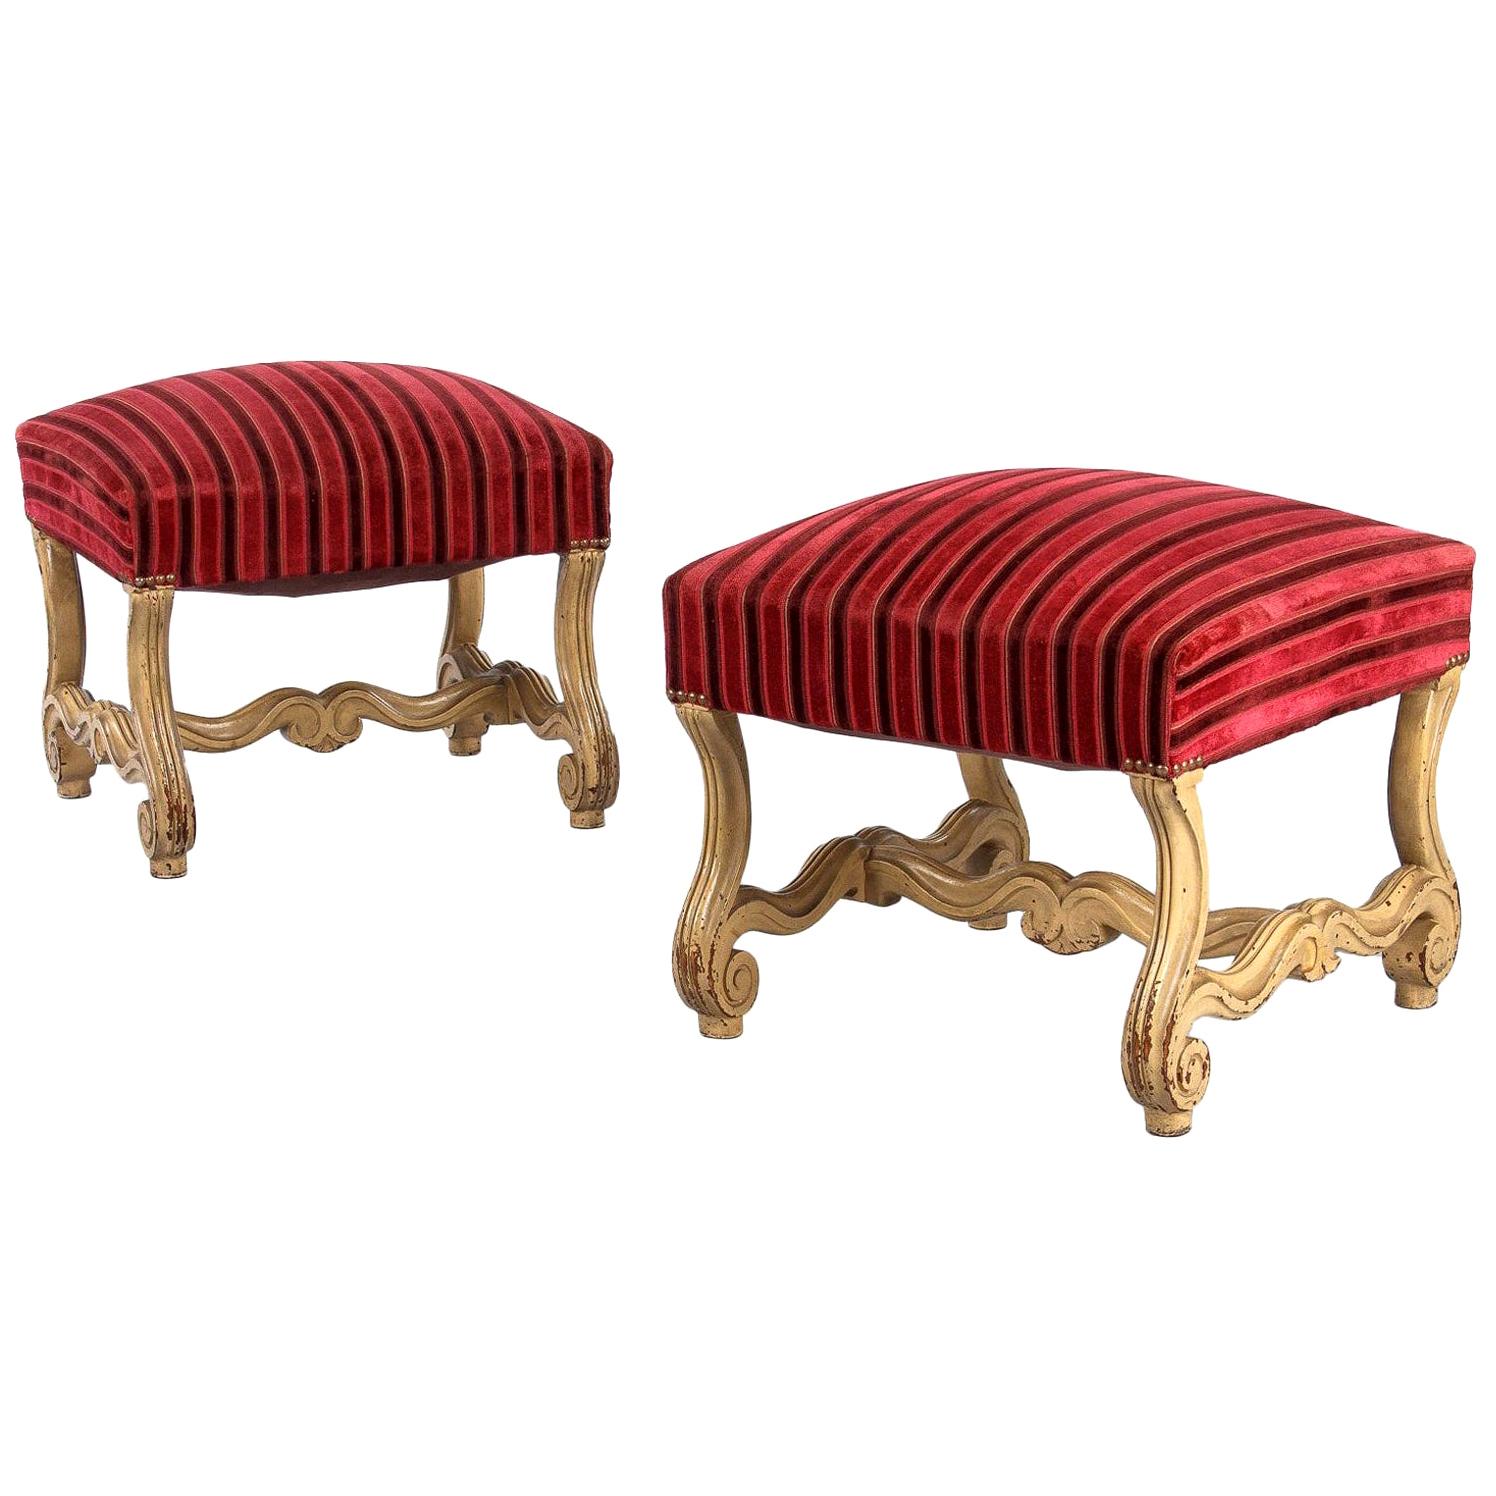 Pair of French Louis XIV Style Painted Upholstered Ottomans, Early 1900s